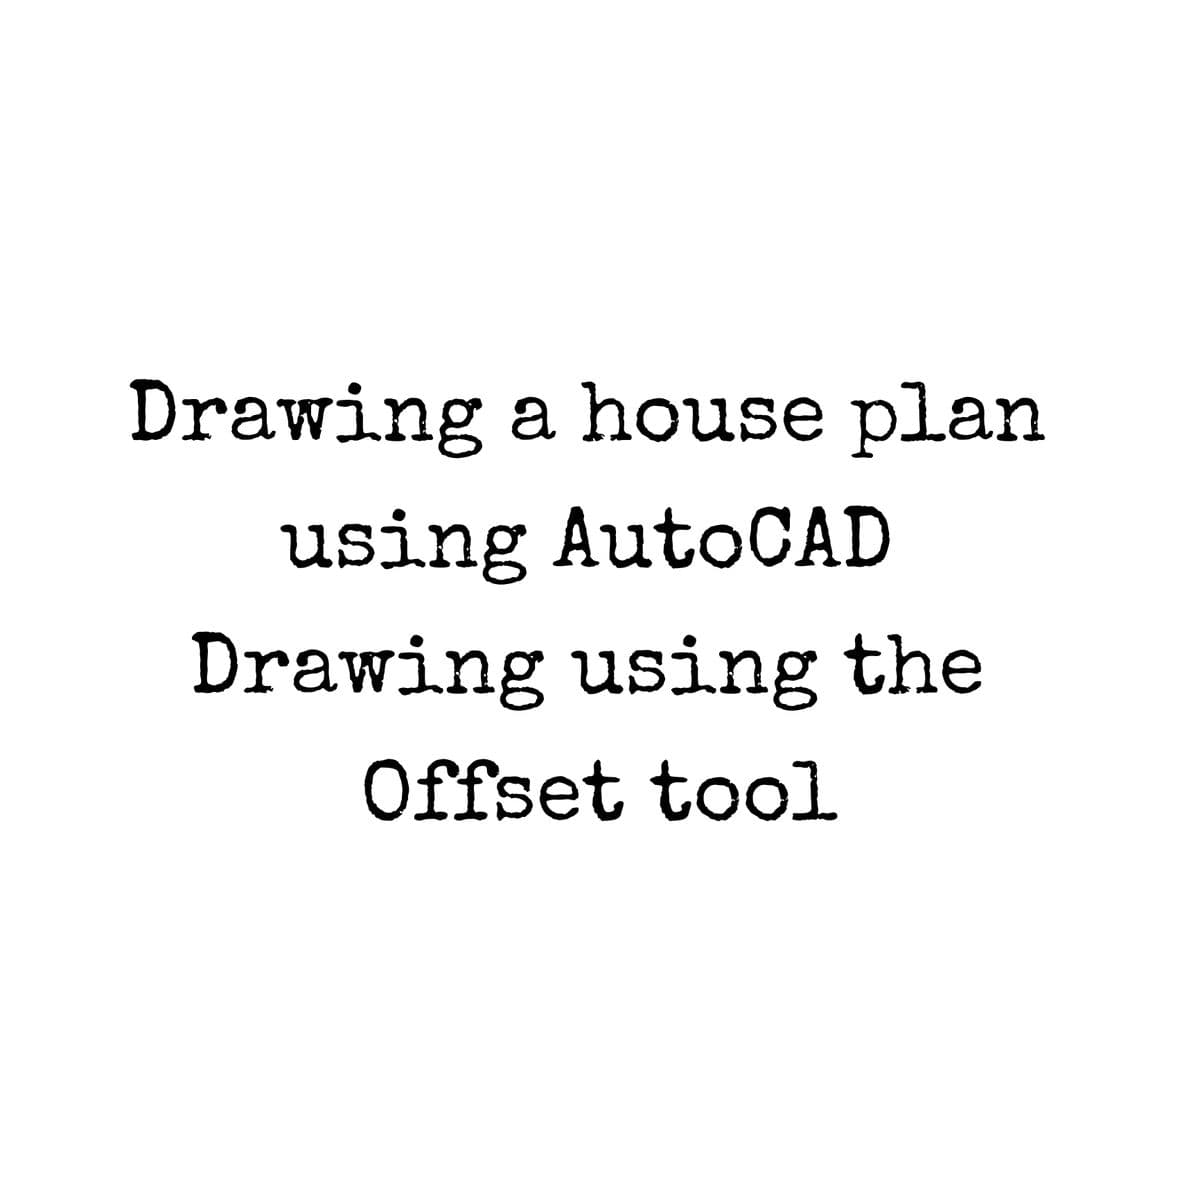 Drawing a house plan
using AutoCAD
Drawing using the
Offset tool
